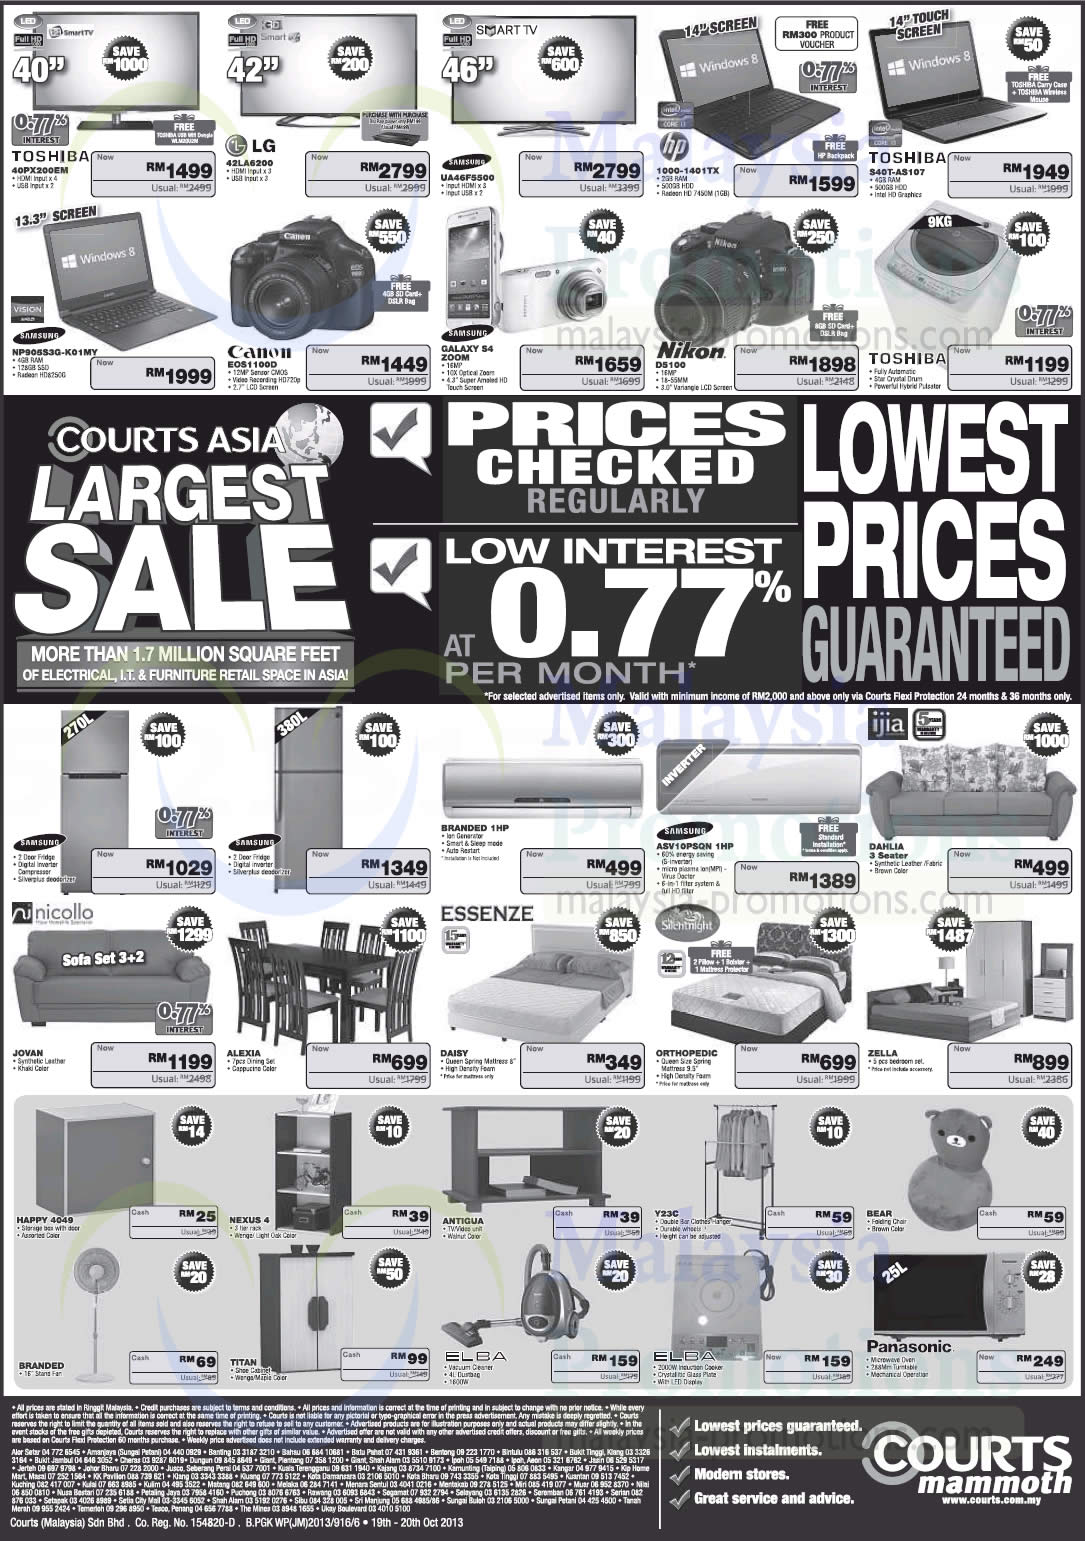 Featured image for Courts Largest Sale Offers 19 - 20 Oct 2013